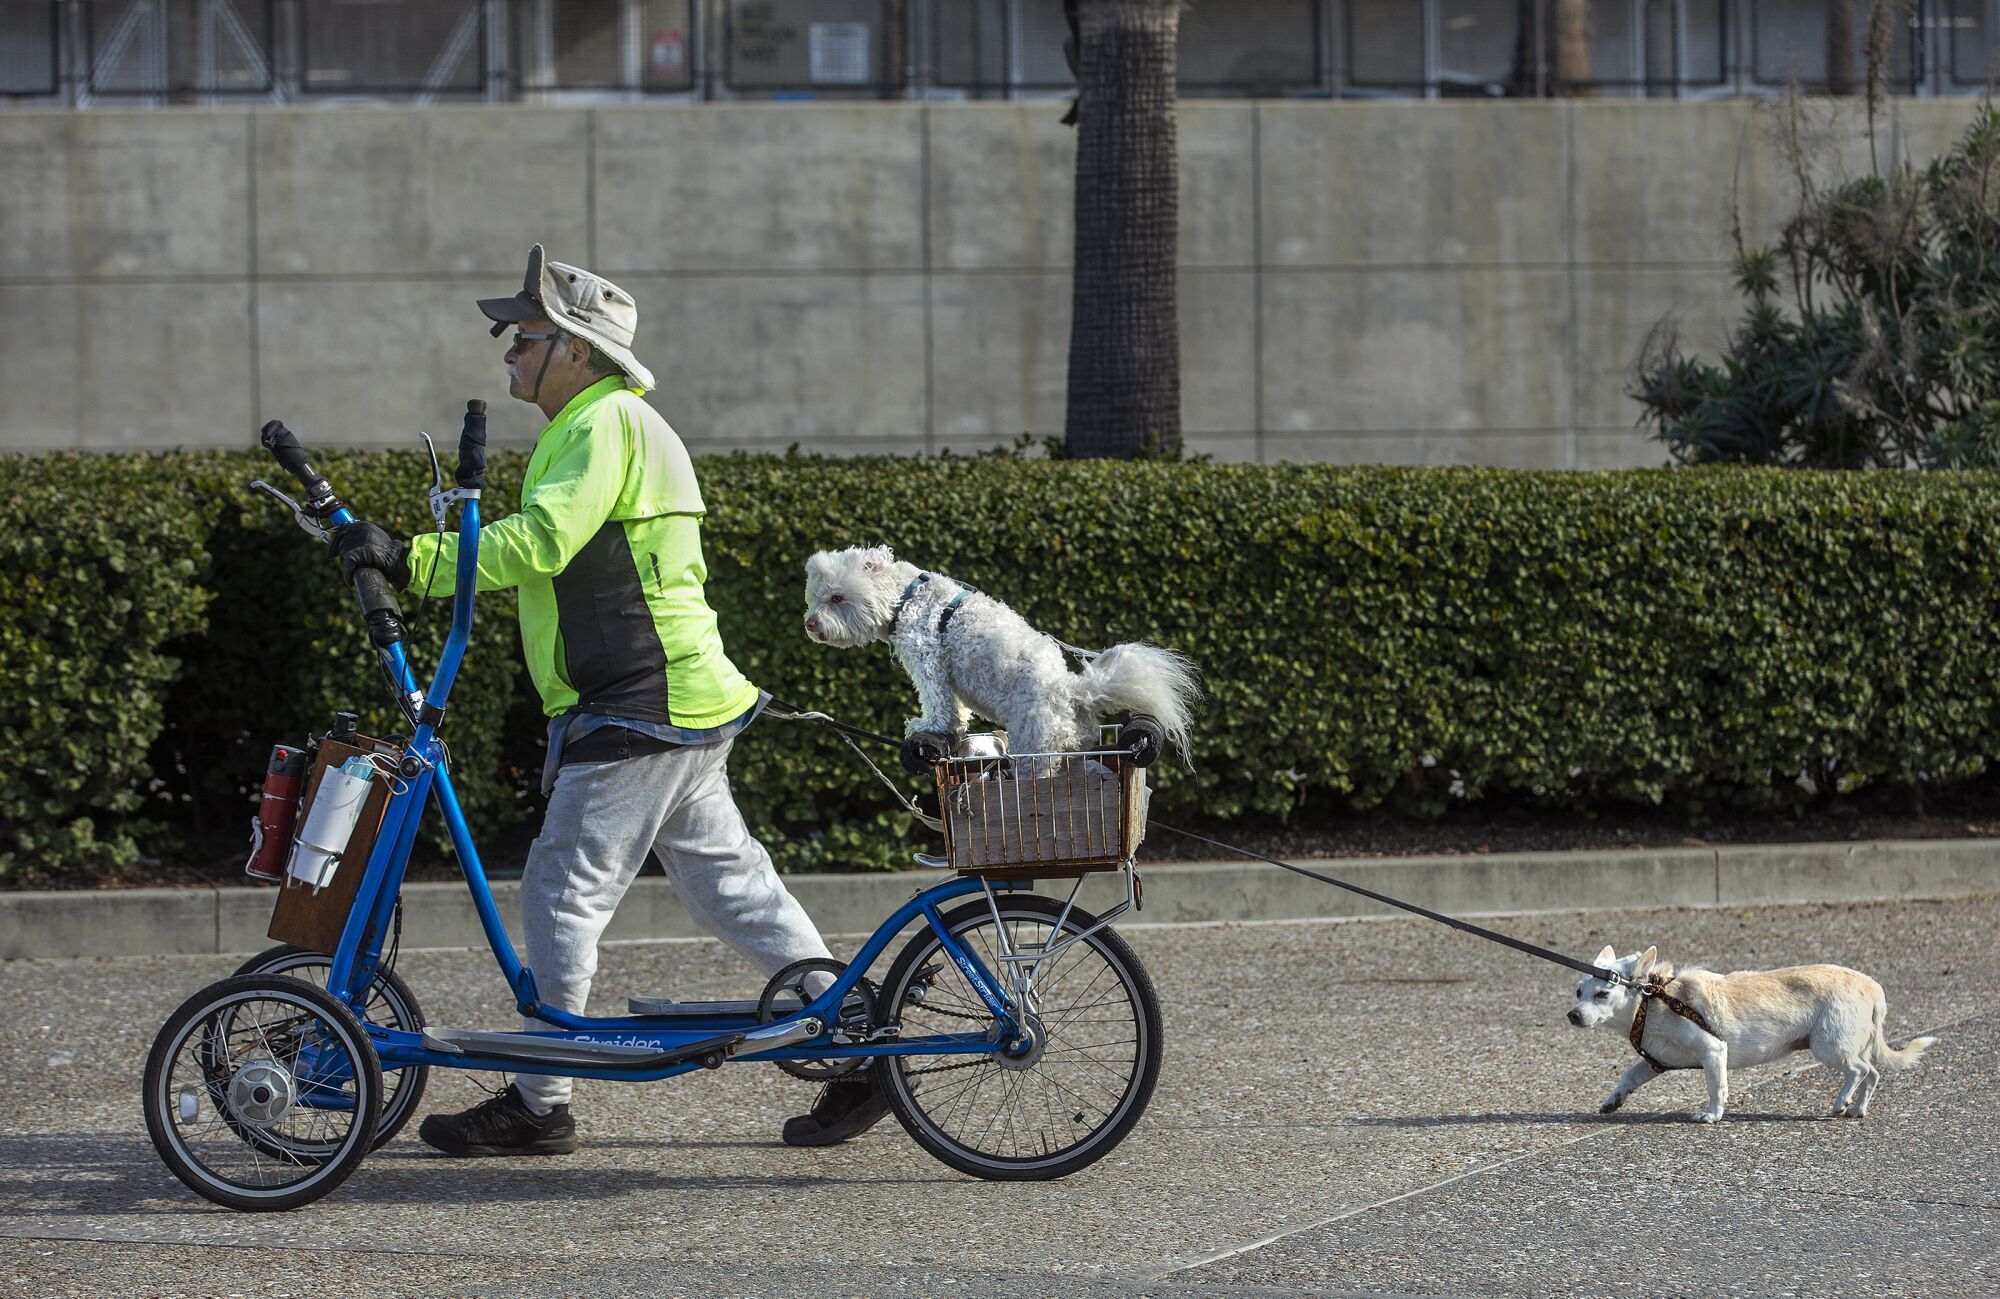 Jose Perez and two dogs make their way along a bike path